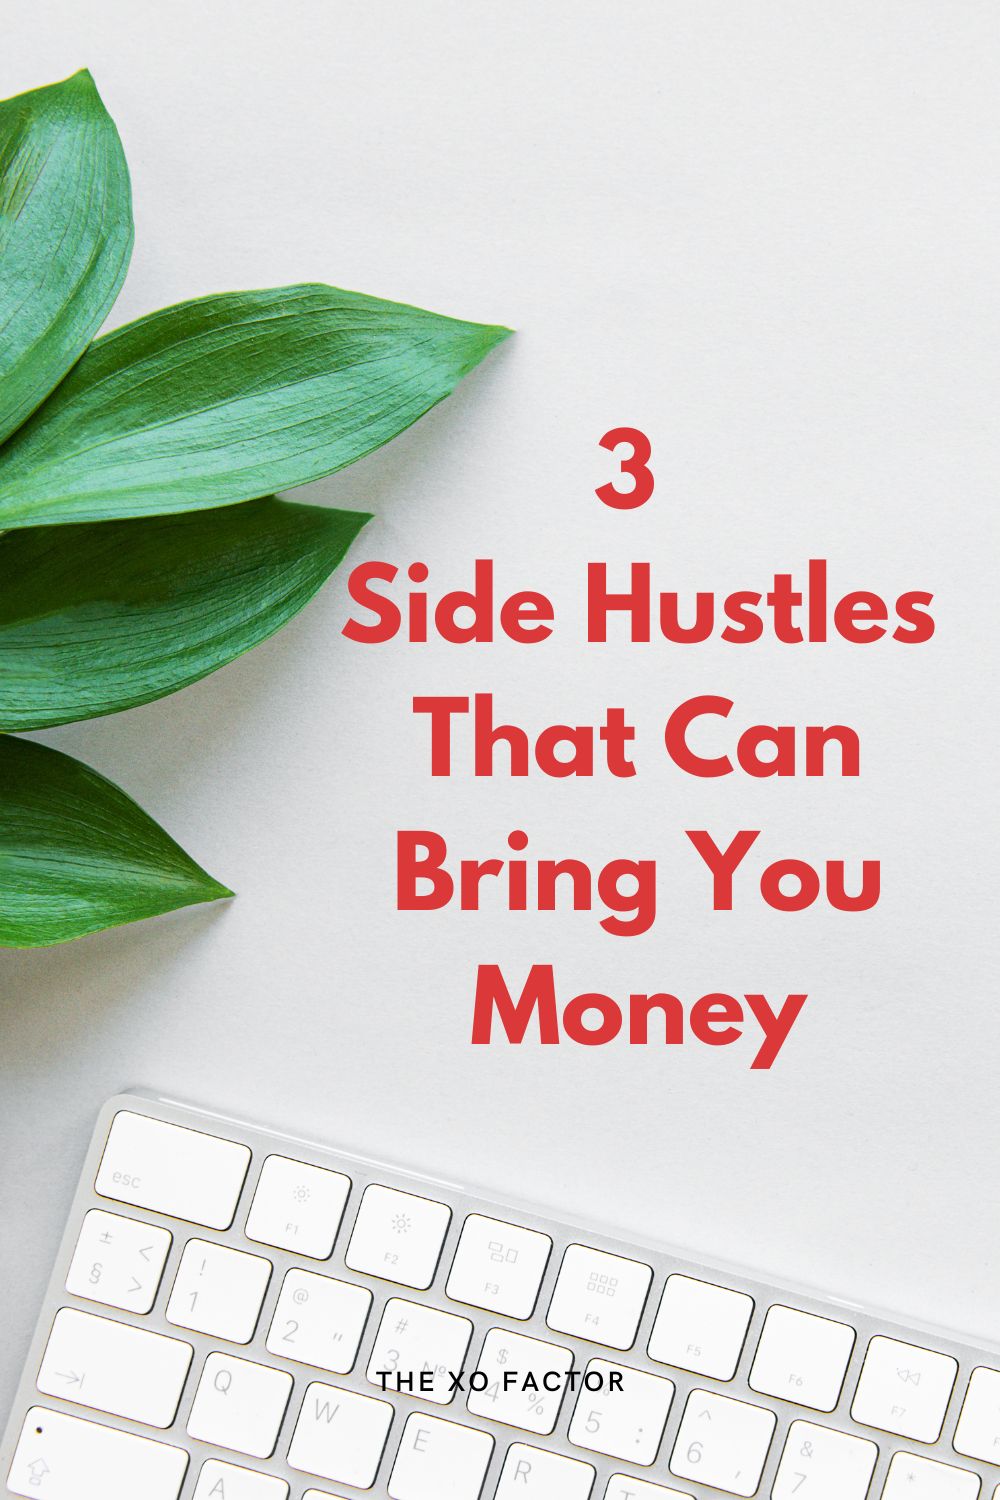 3 Side Hustles That Can Bring You Money